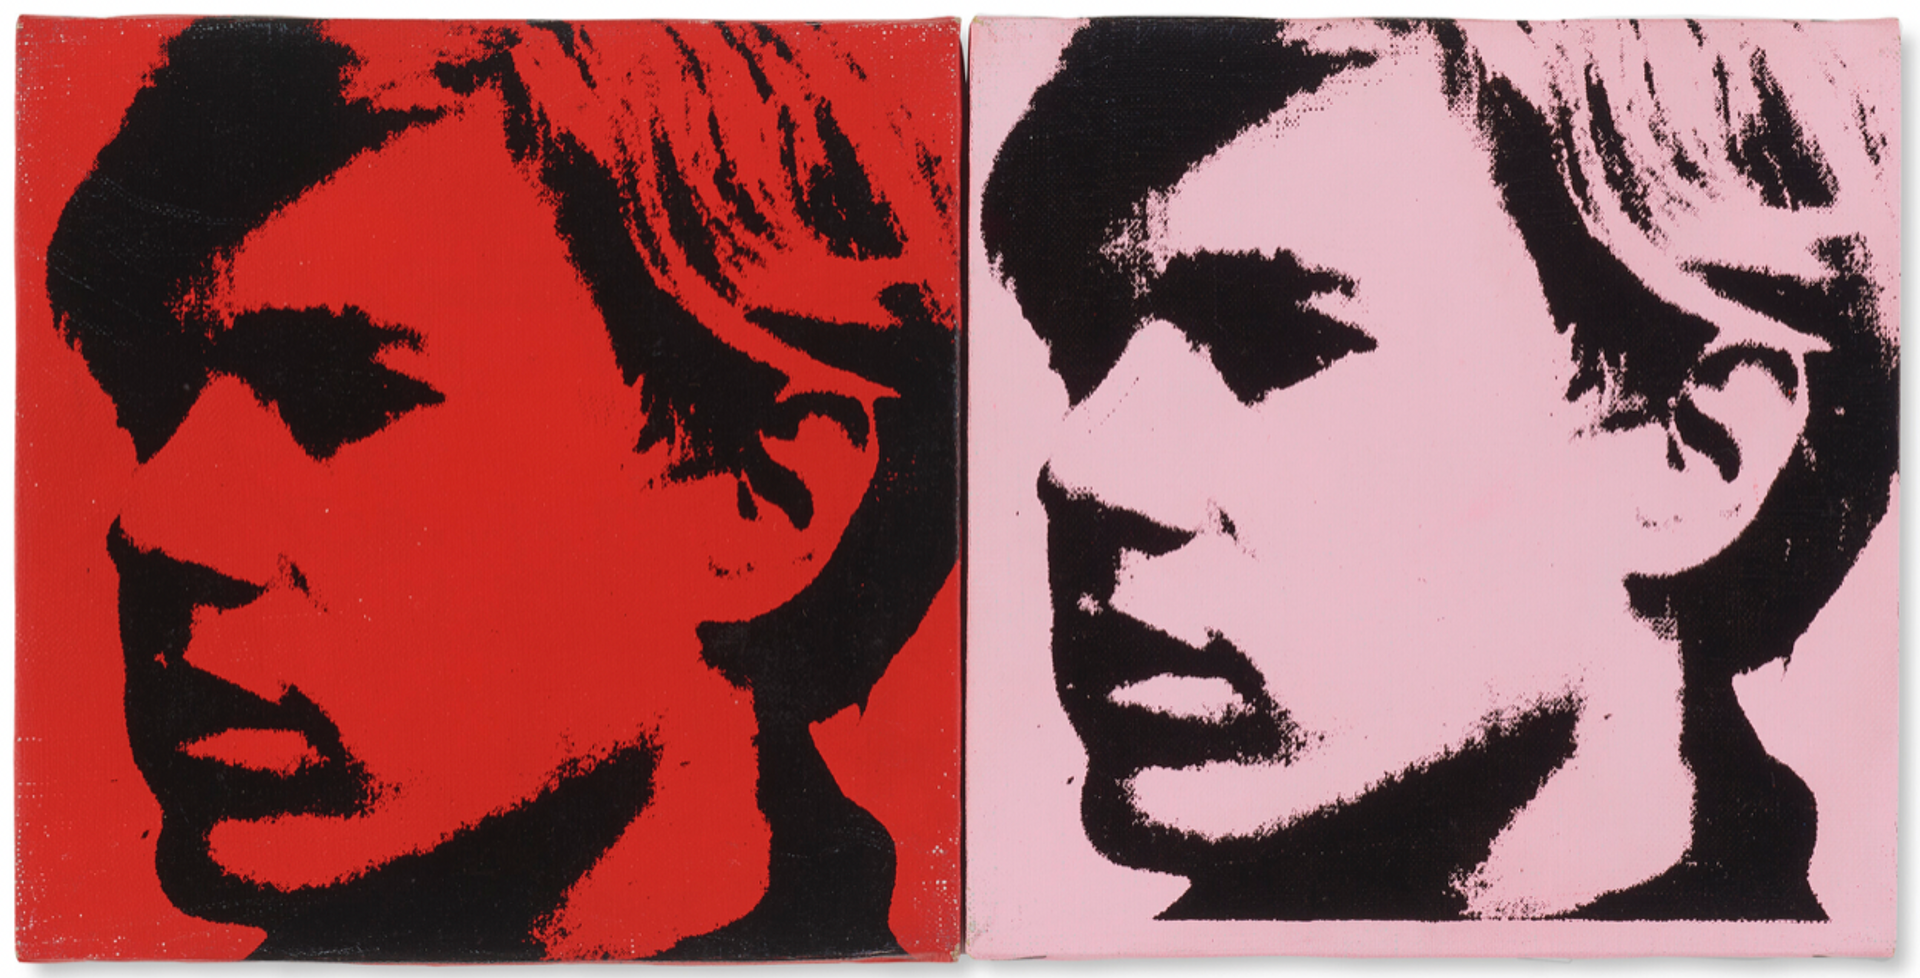 Image © Christie's / Self-Portrait (two works) © Andy Warhol 1967